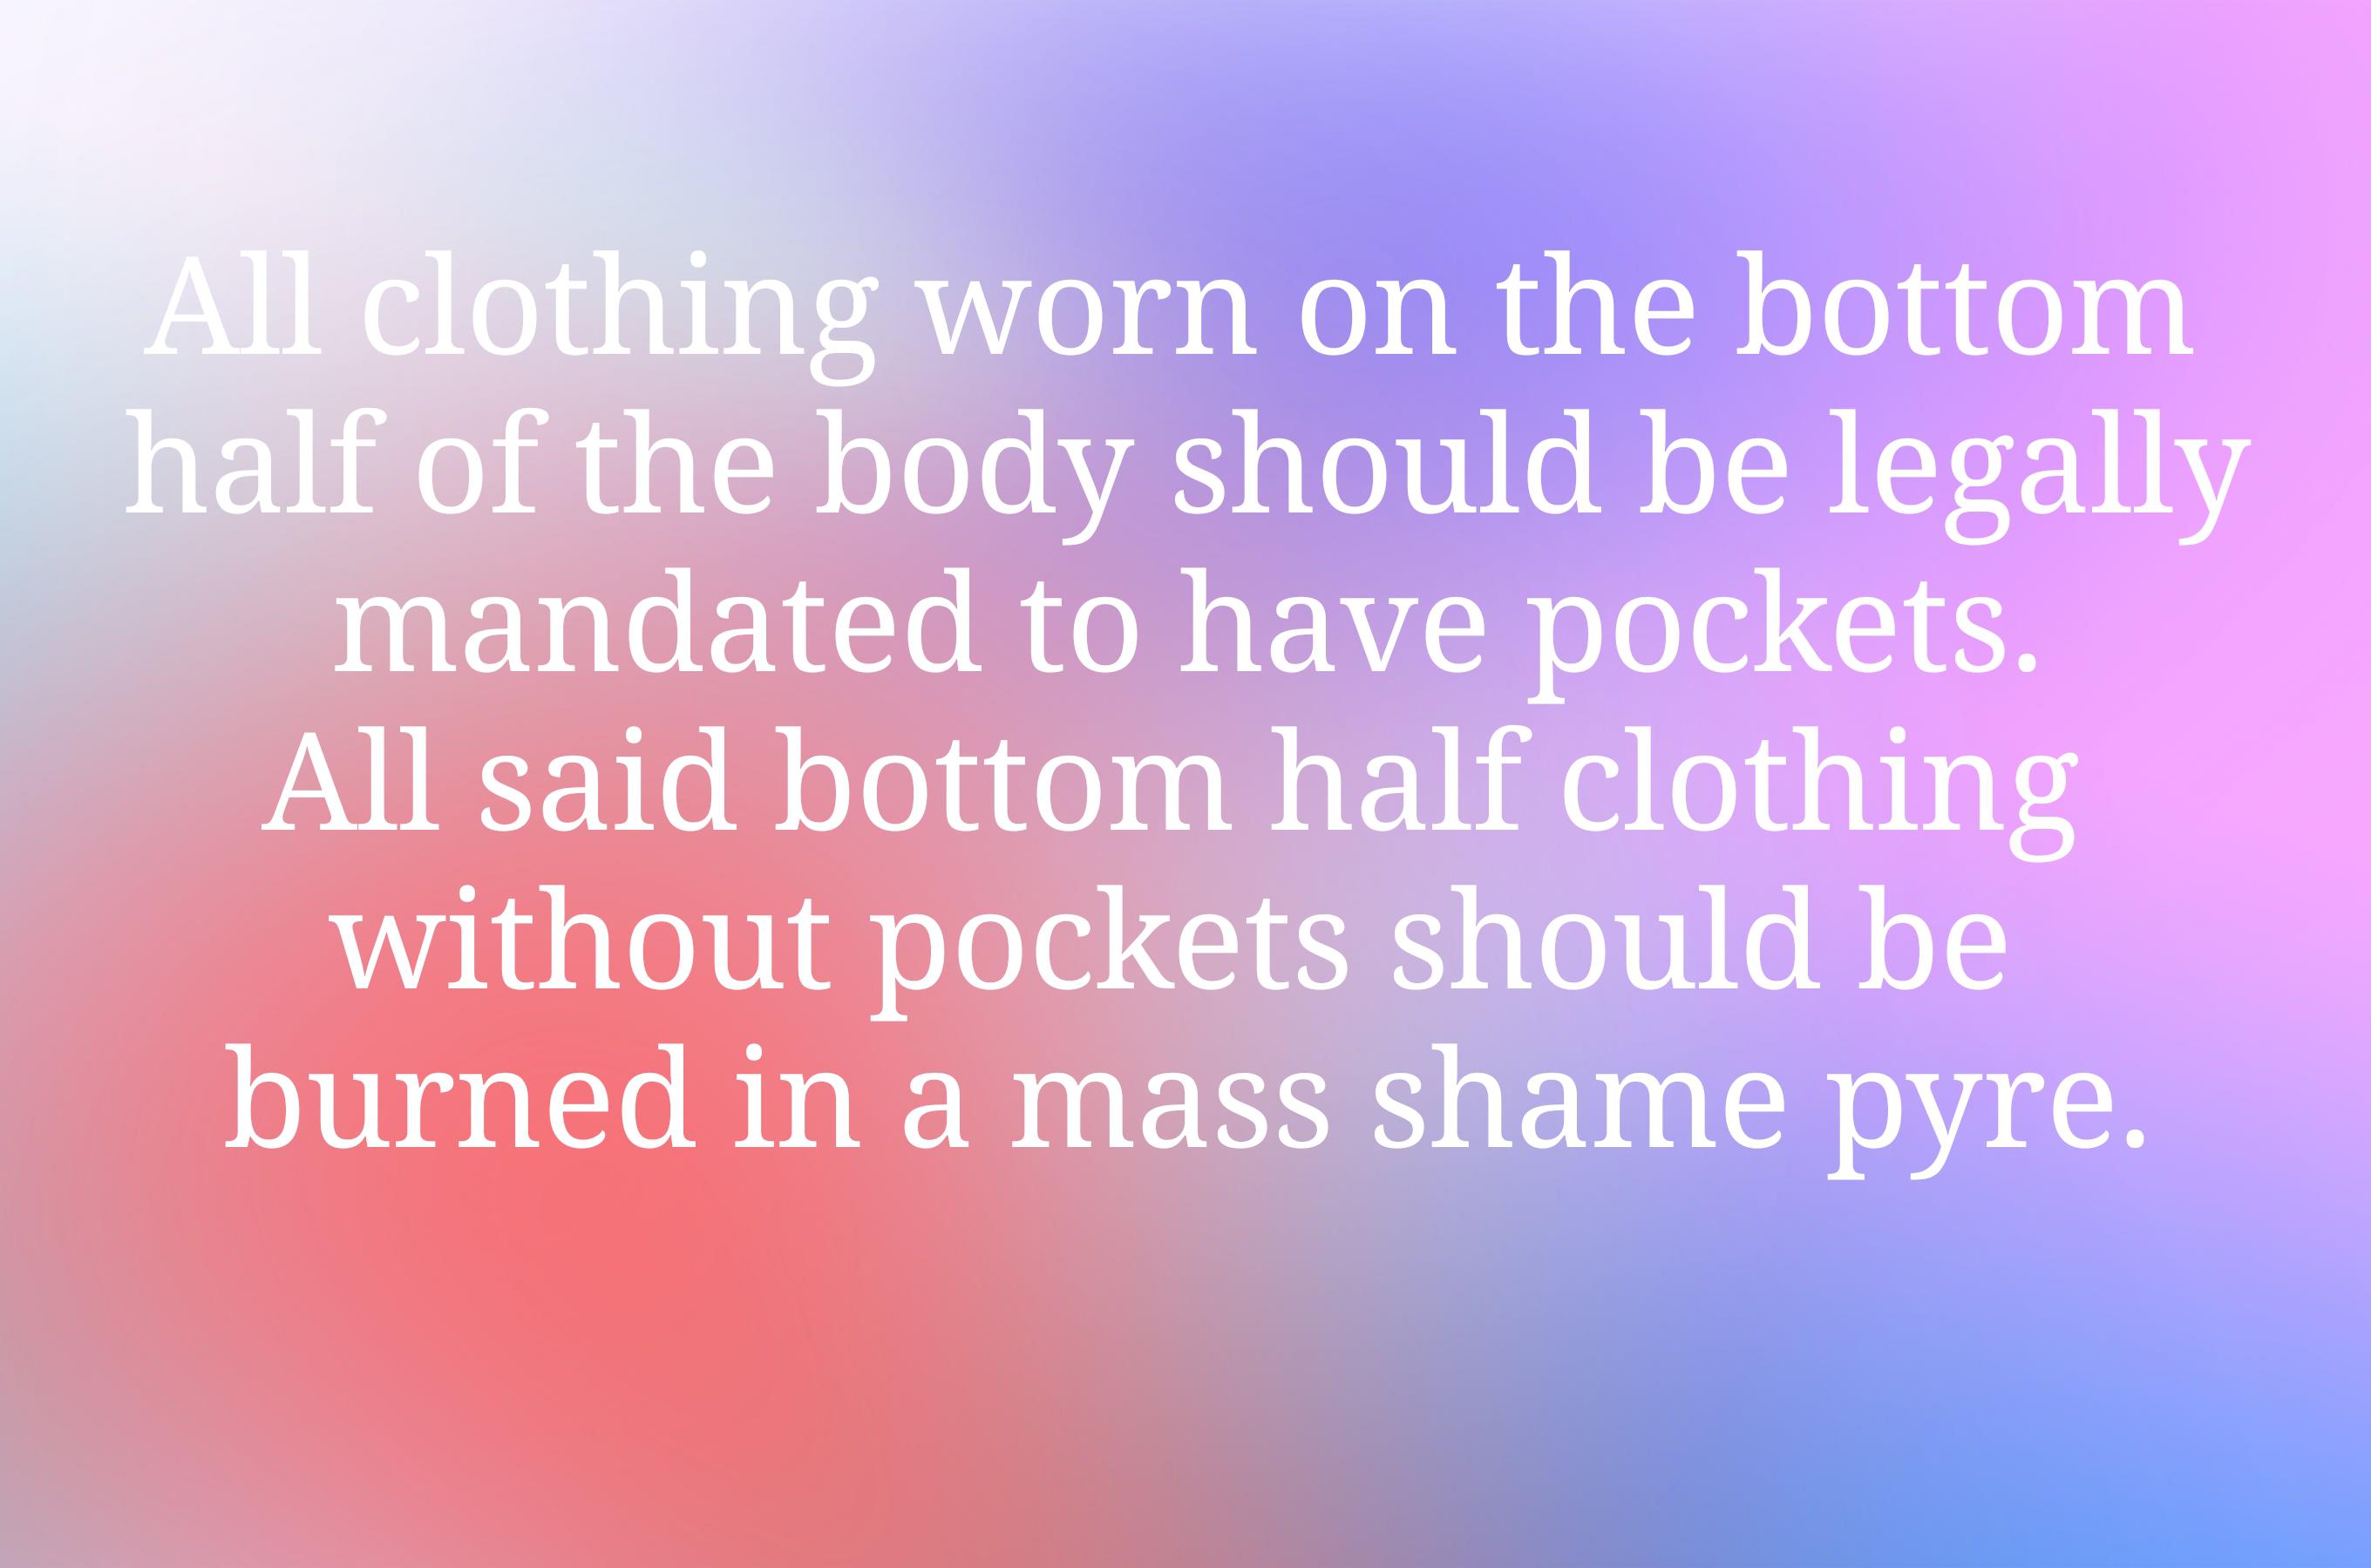 misc memes misc text: All clothing worn on the bottom half of the body should be legally mandated to have pockets. All said bottom half clothing without pockets should be burned in a mass shame pyre, 